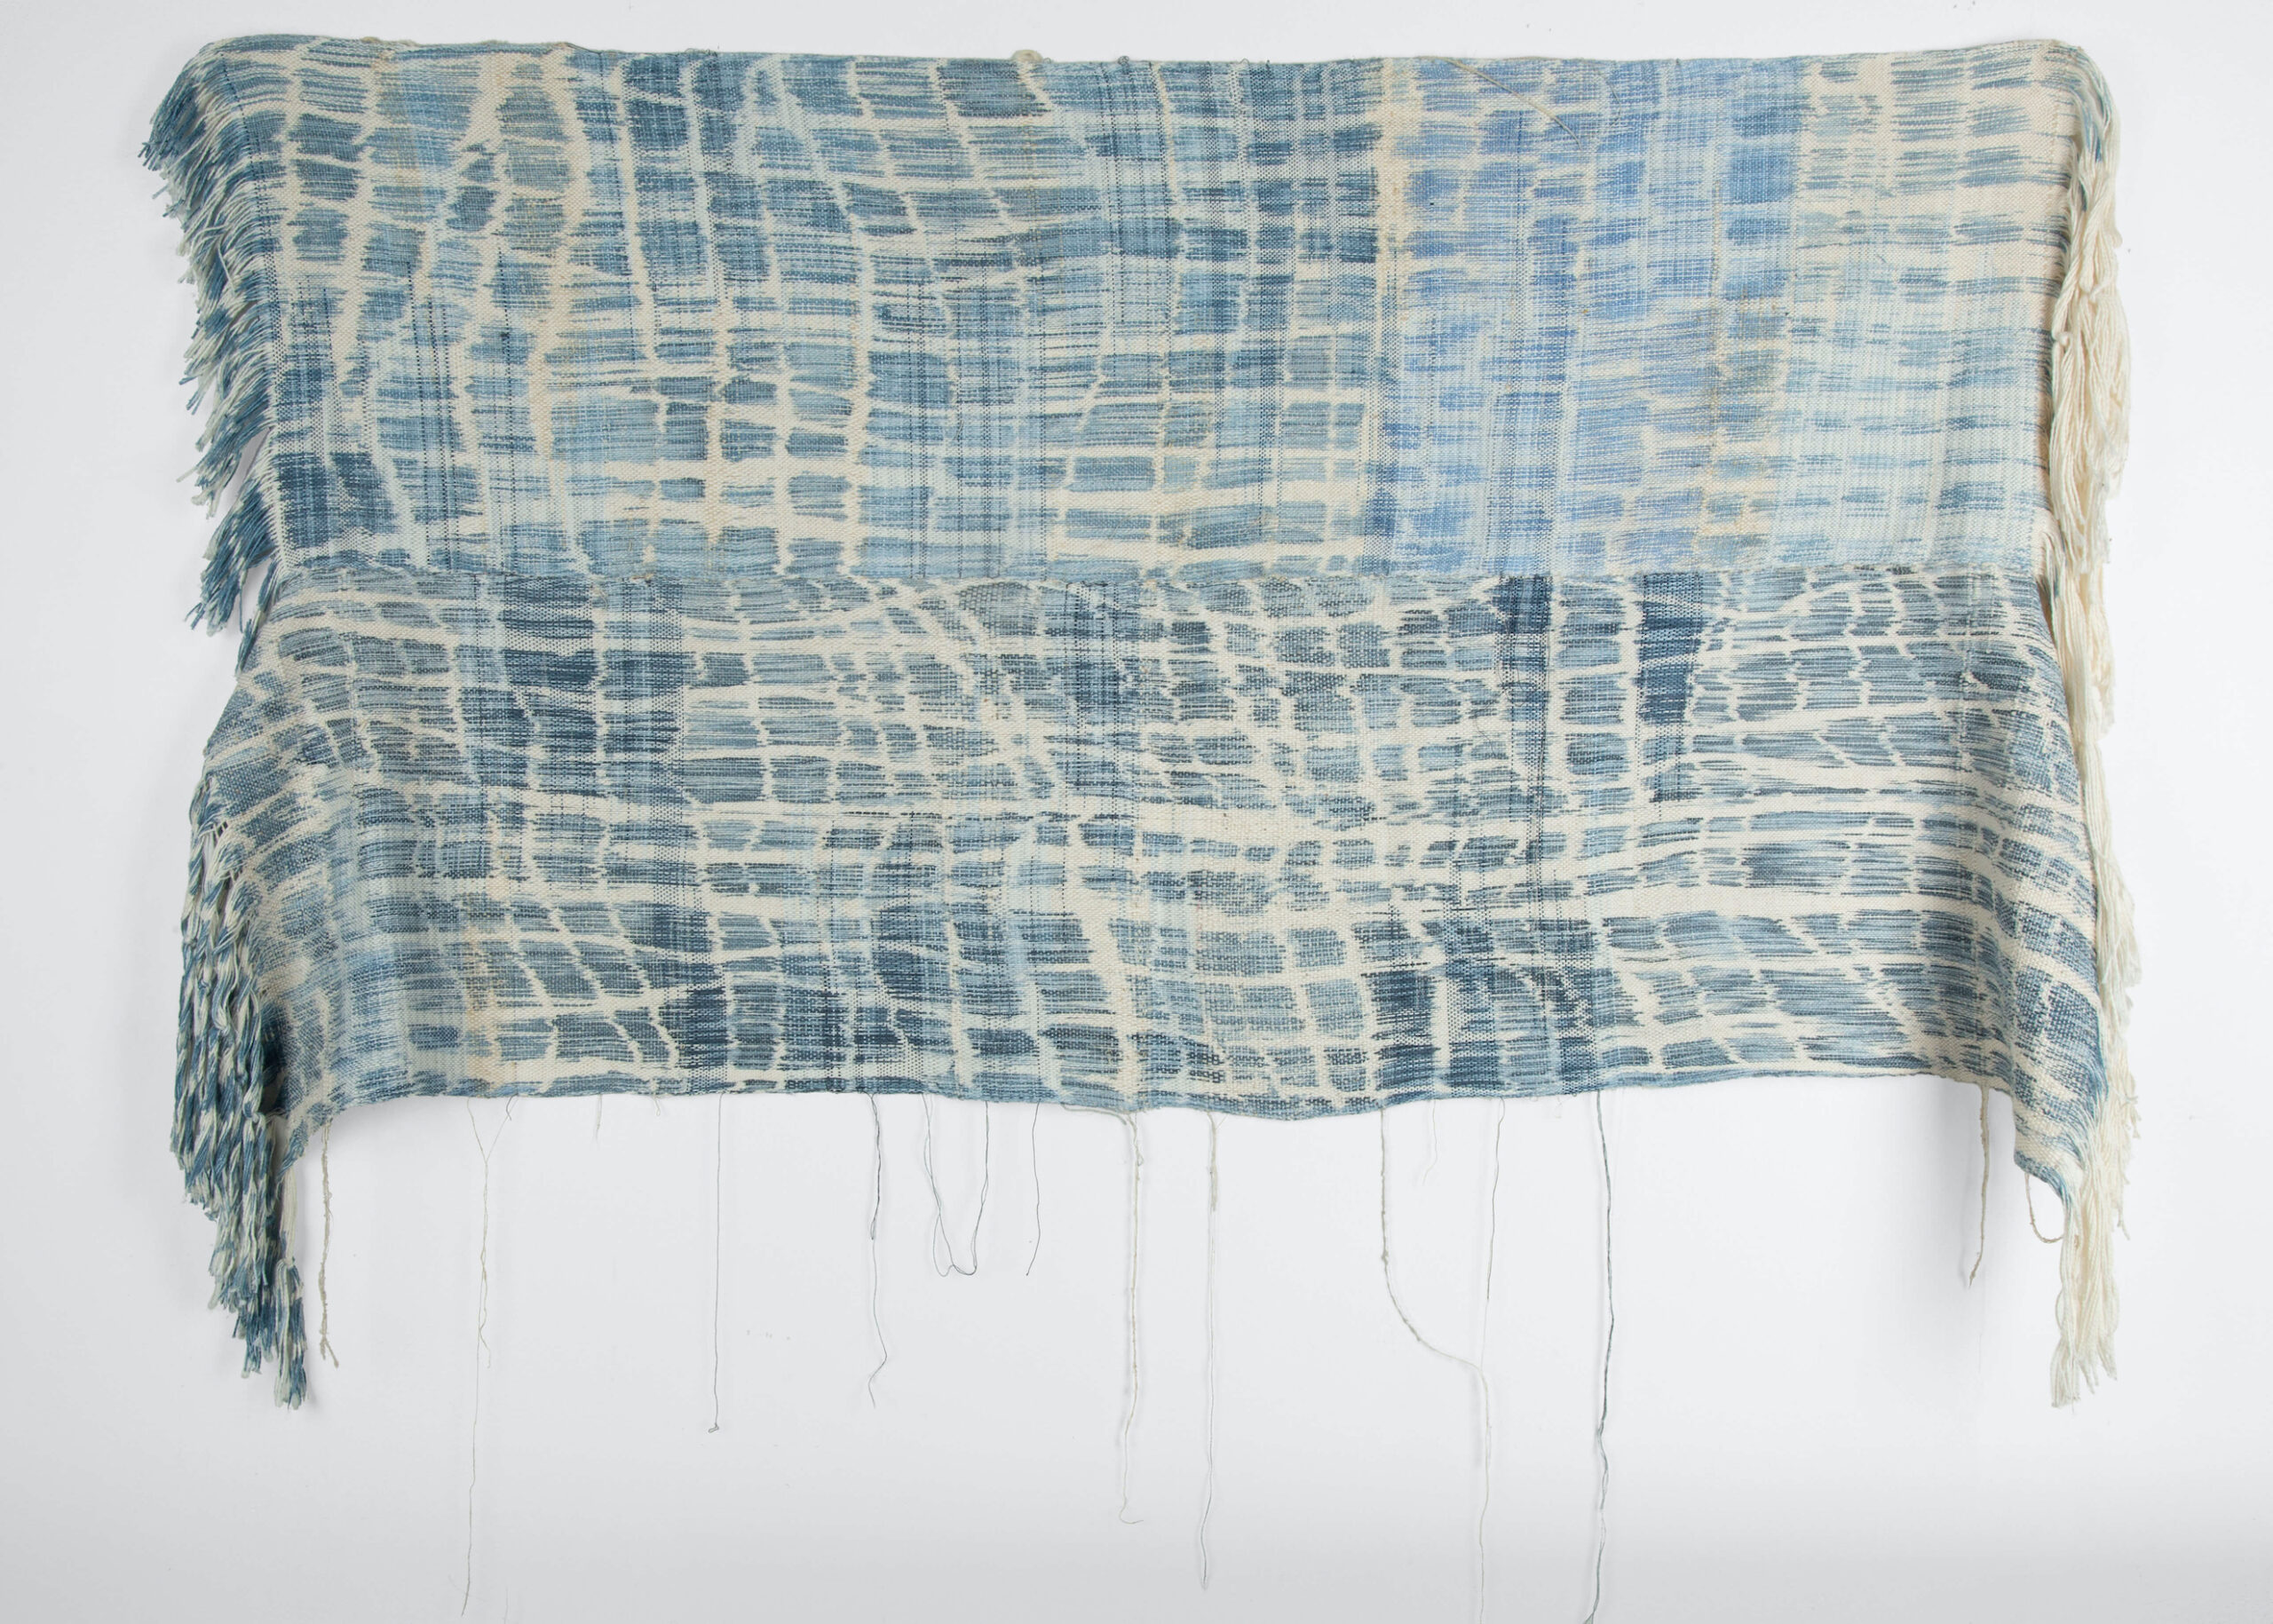 Woven tapestry using shades of blue and white fibers resembling pools of light and shadow on gently rippling water.